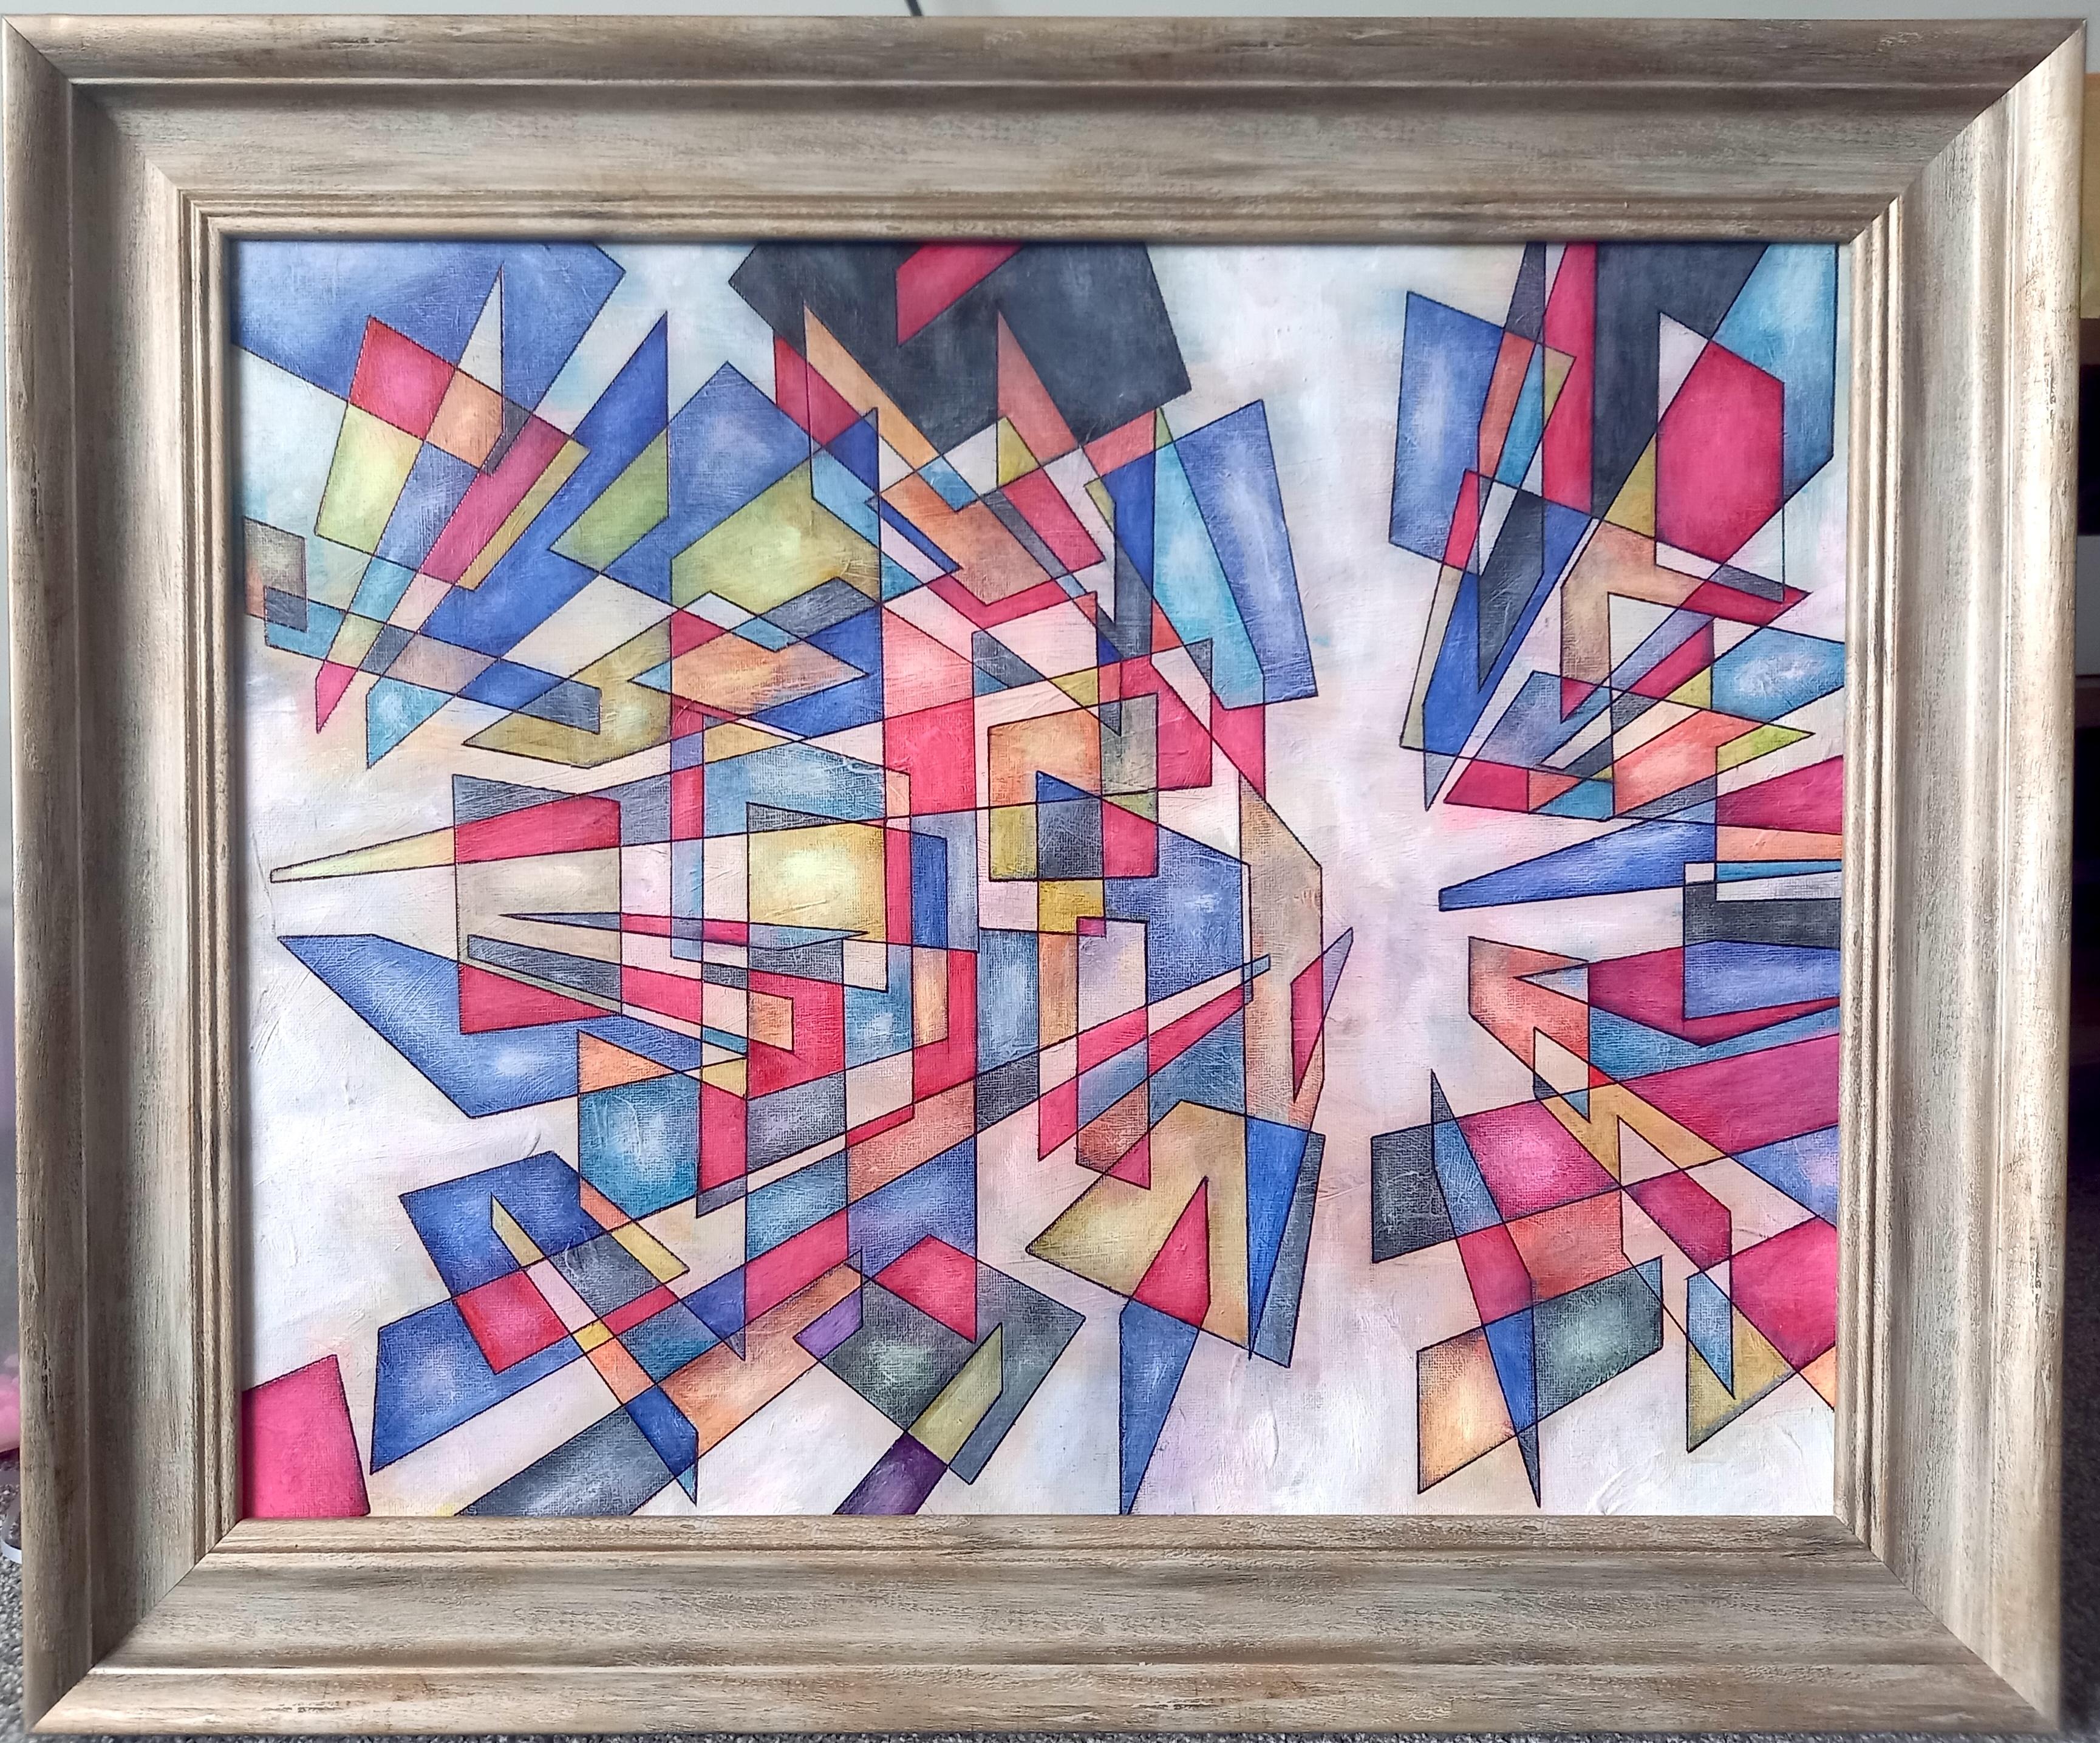 Contemporary abstract oil on board by Christopher Barrow
Frame included
Signed